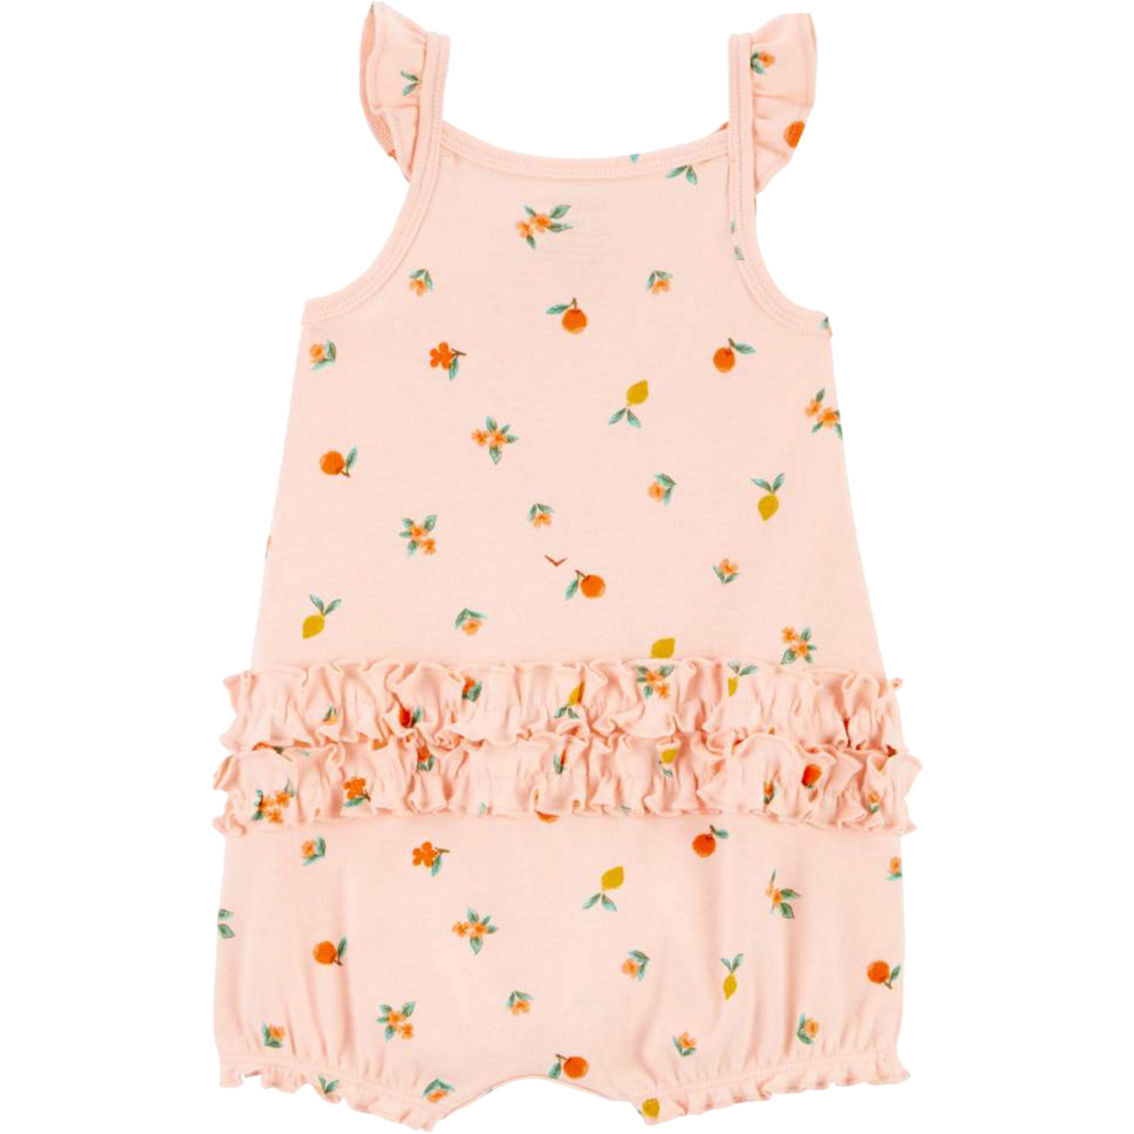 Carter's Baby Girls Peach Snap Up Cotton Romper - Image 2 of 2